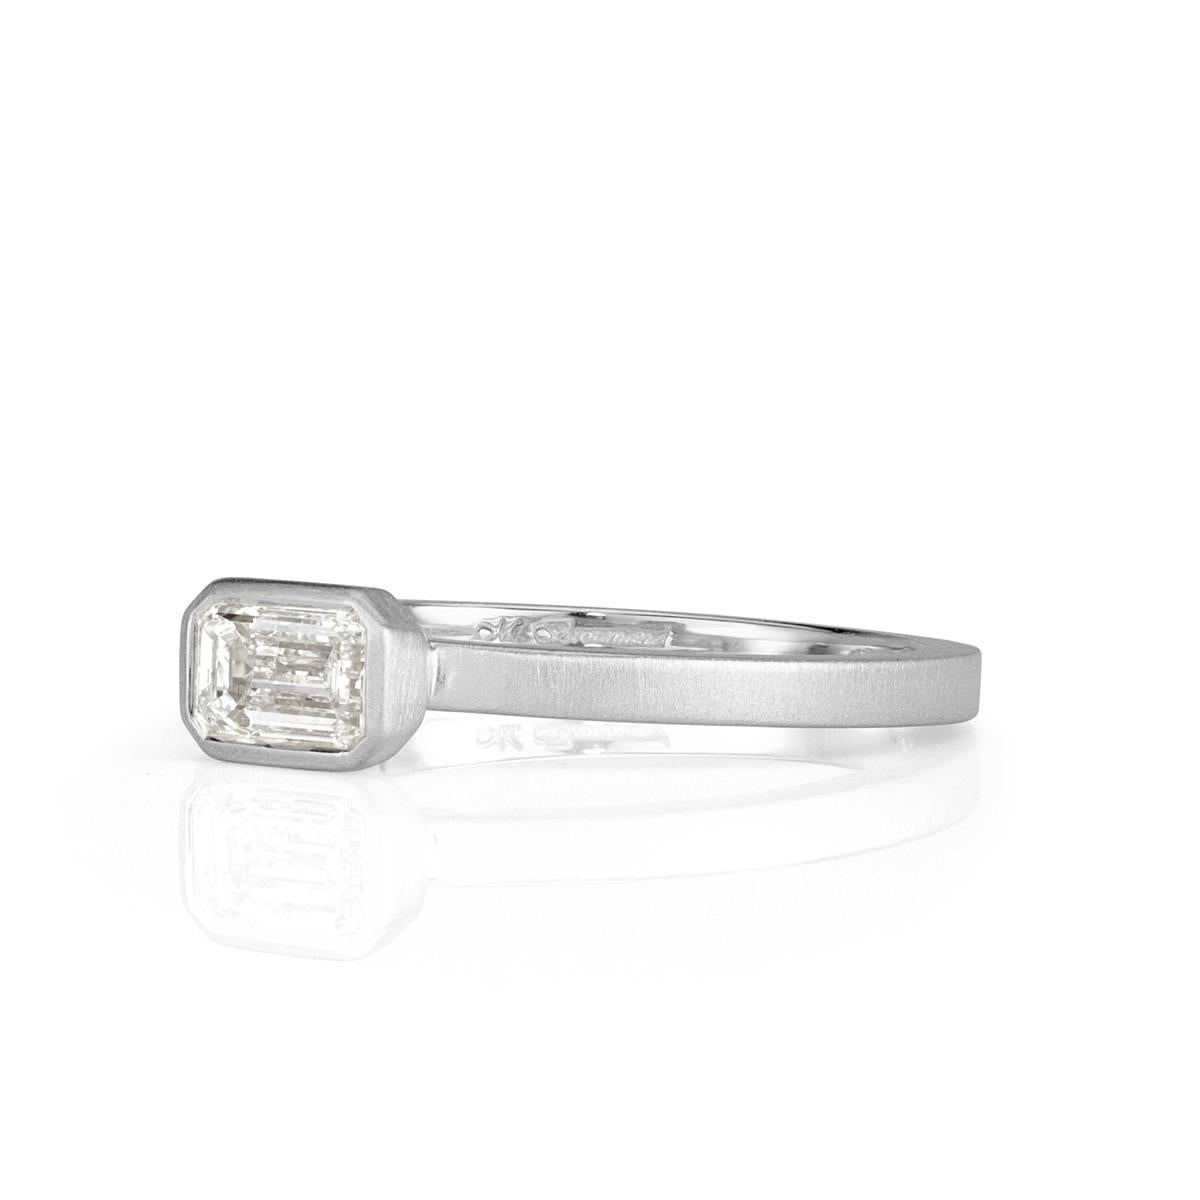 This ravishing diamond band showcases a 0.45ct emerald cut center diamond bezel set in an 18k white gold, satin finish setting style. It is graded at F in color, VS1 in clarity.
